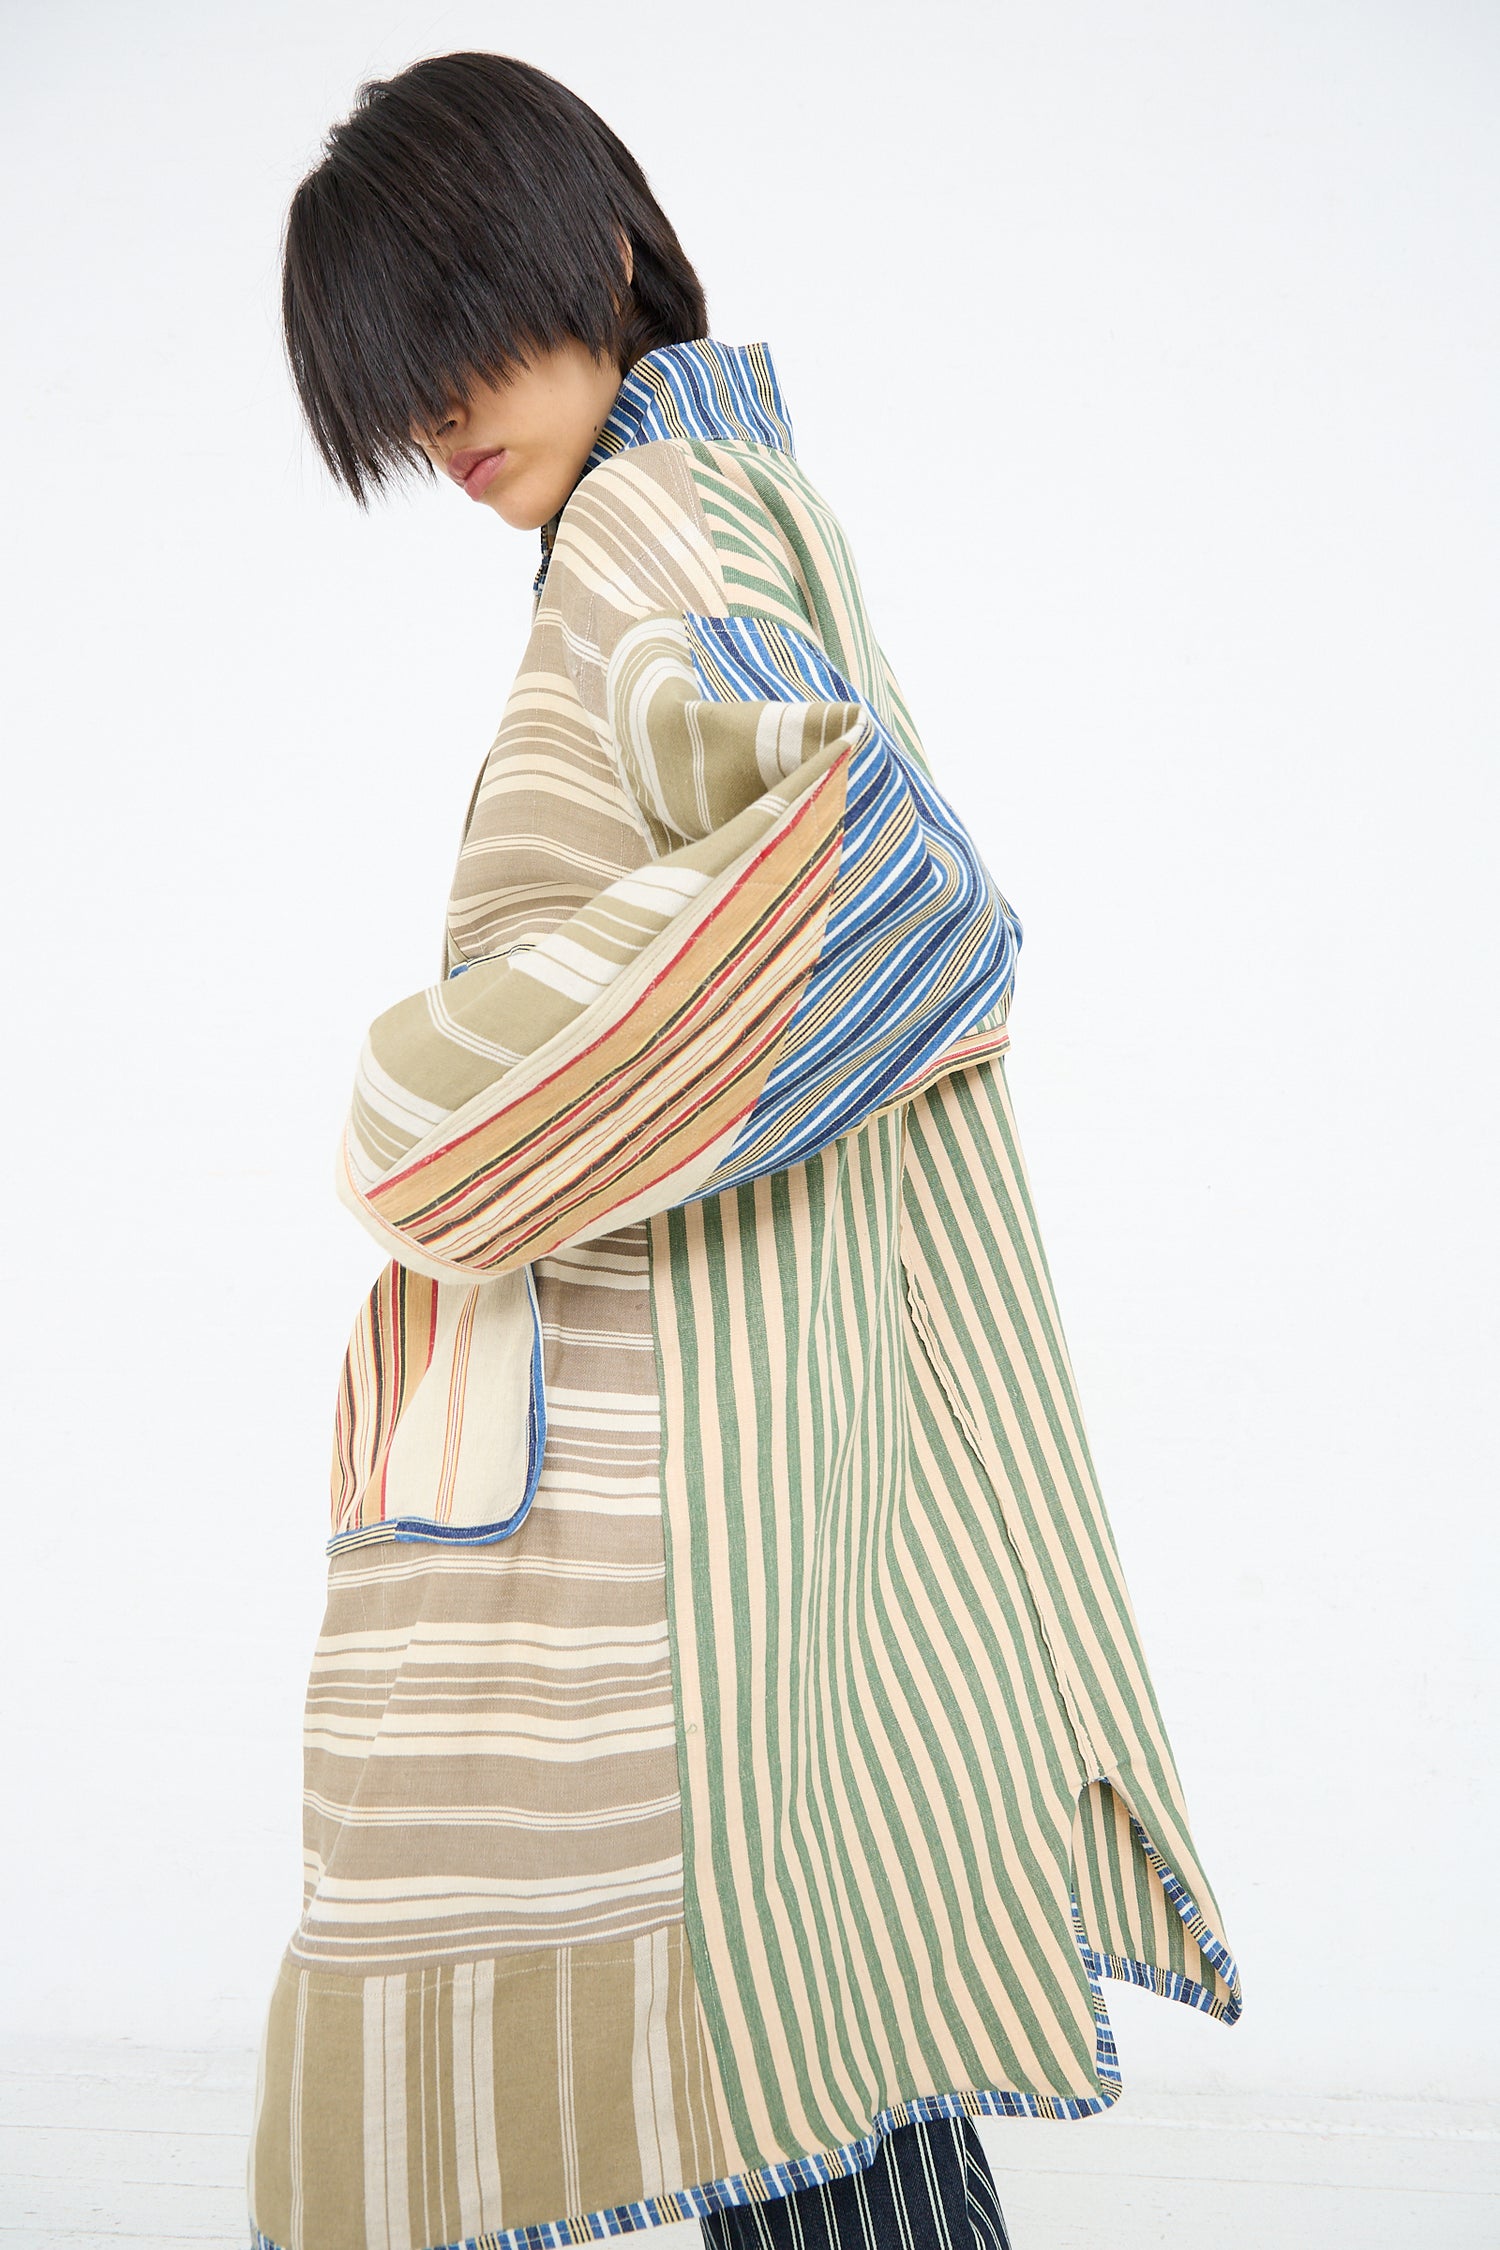 A person is wearing a Thank You Have A Good Day Patchwork French Ticking Fishtail Parka with varying patterns and colors, posing with their back partly towards the camera and looking down to their left.